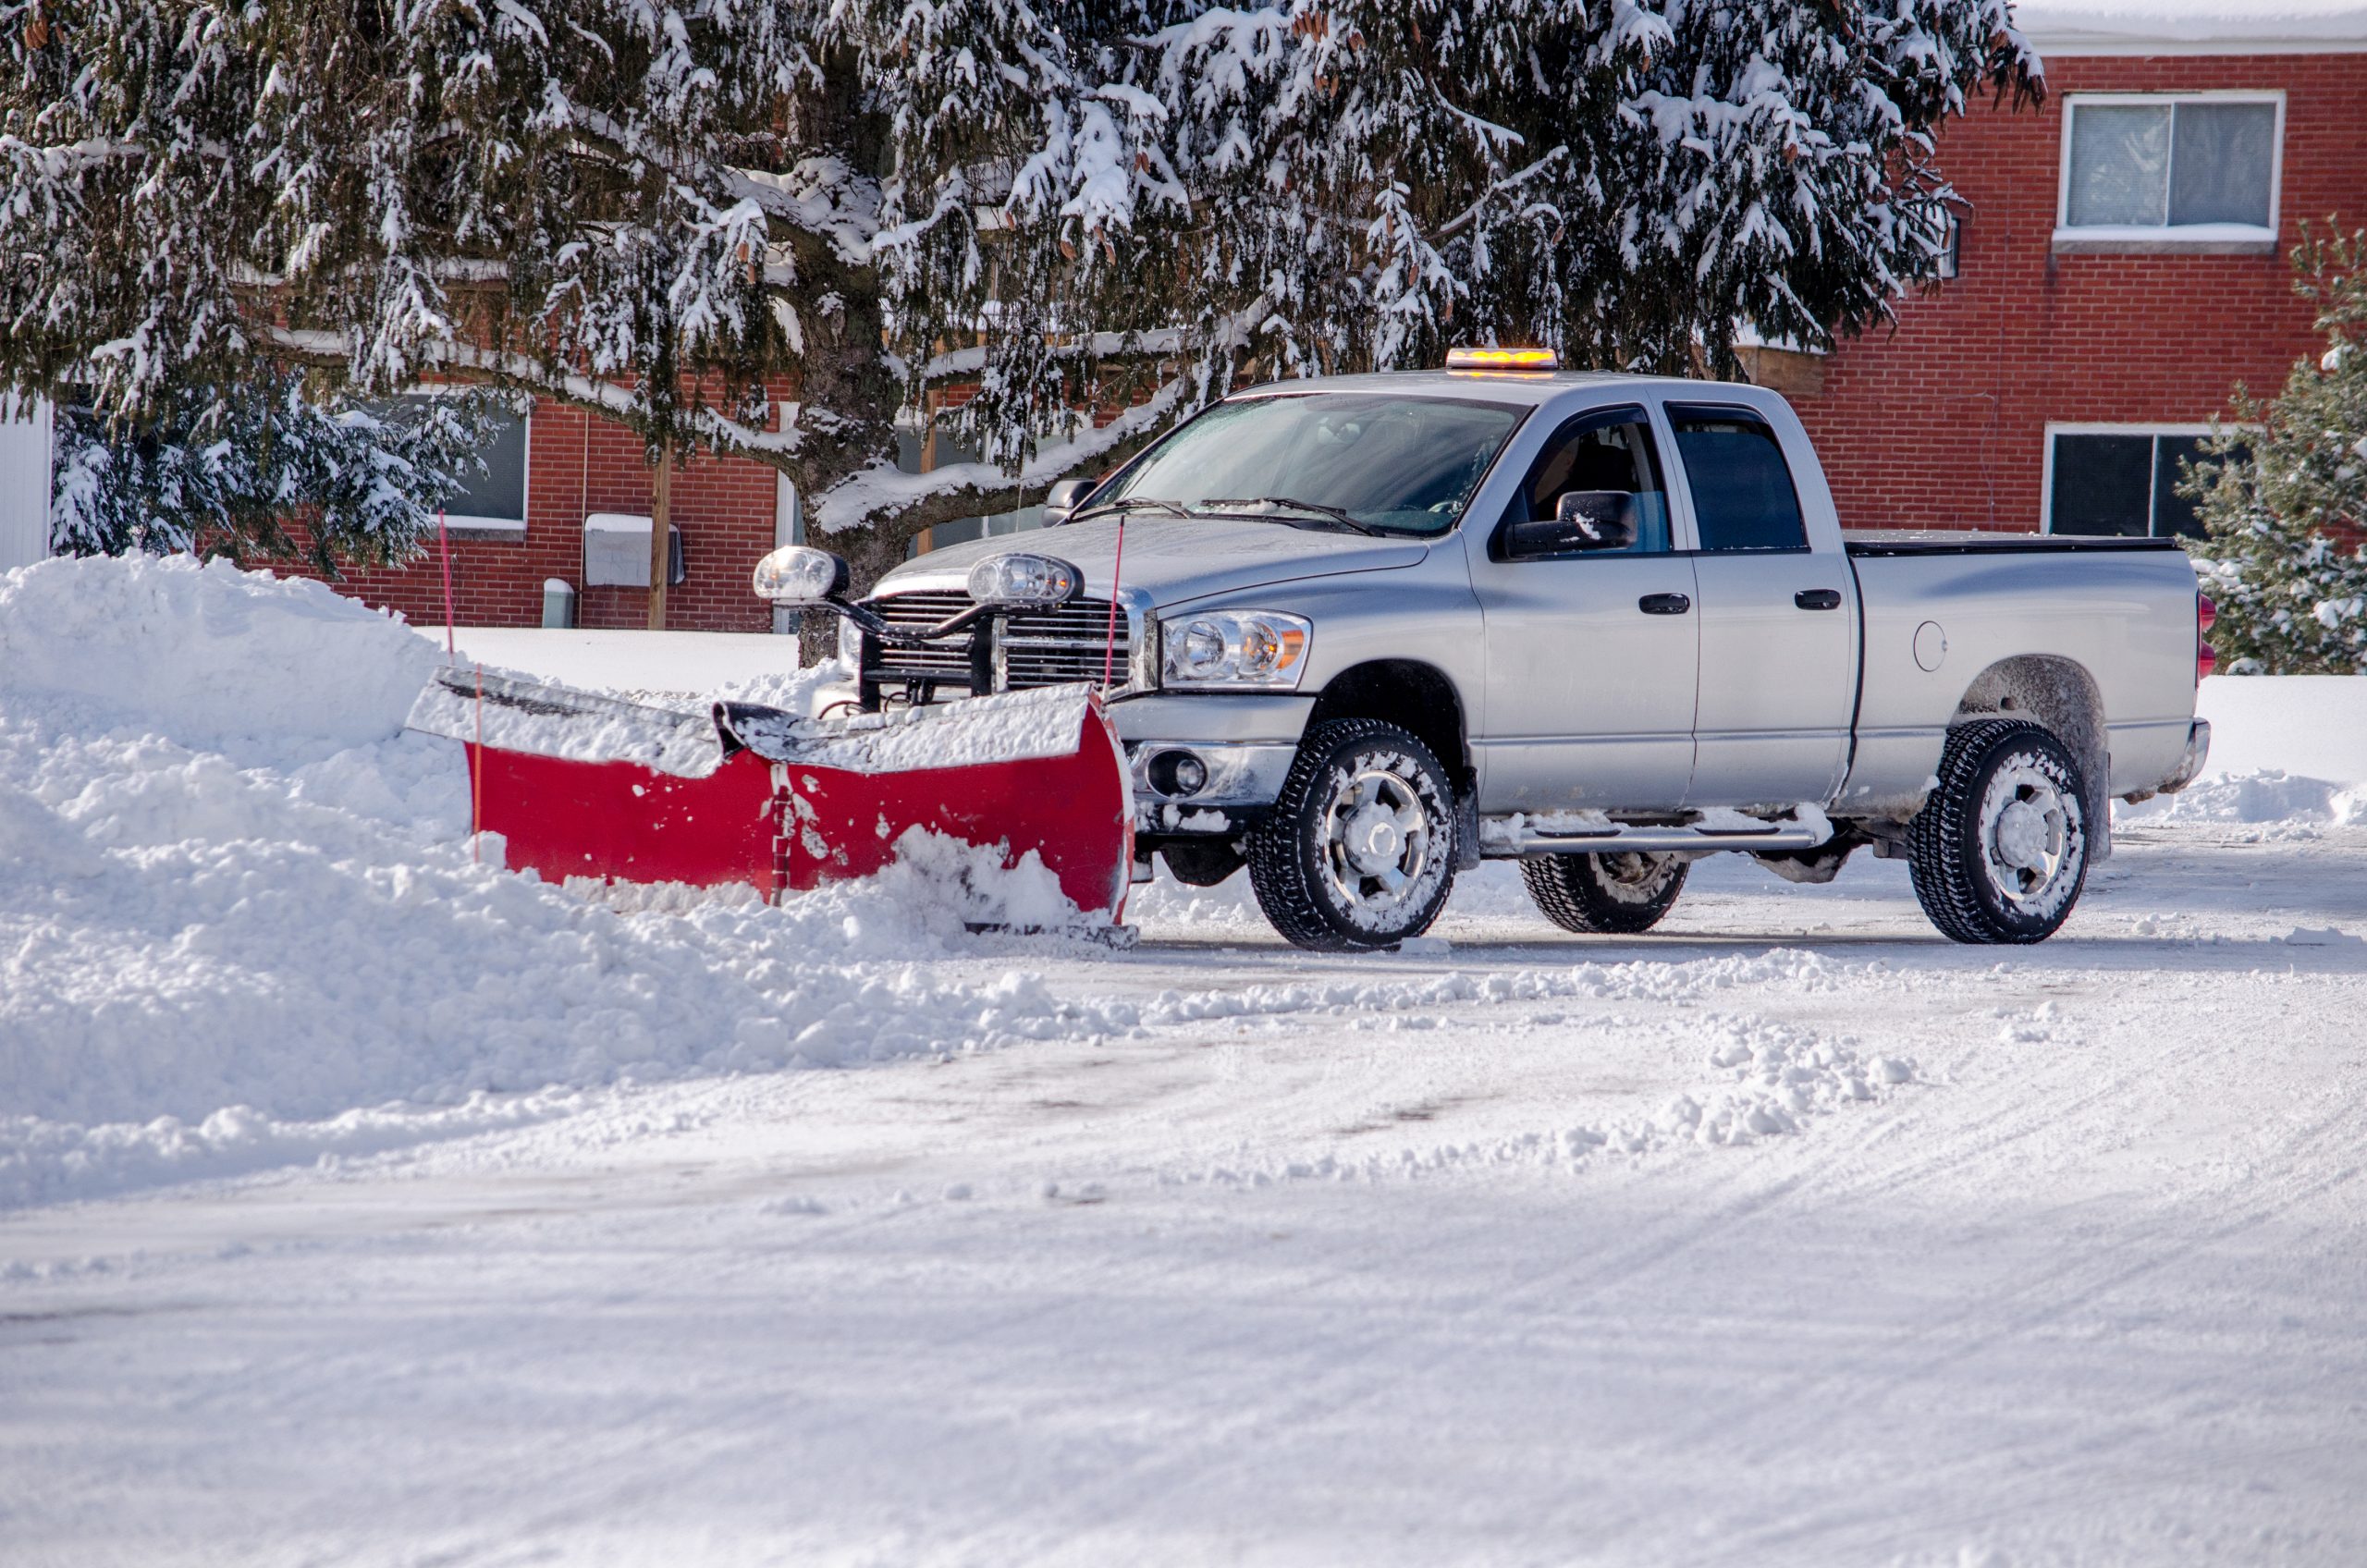 Snow Removal in Central Illinois